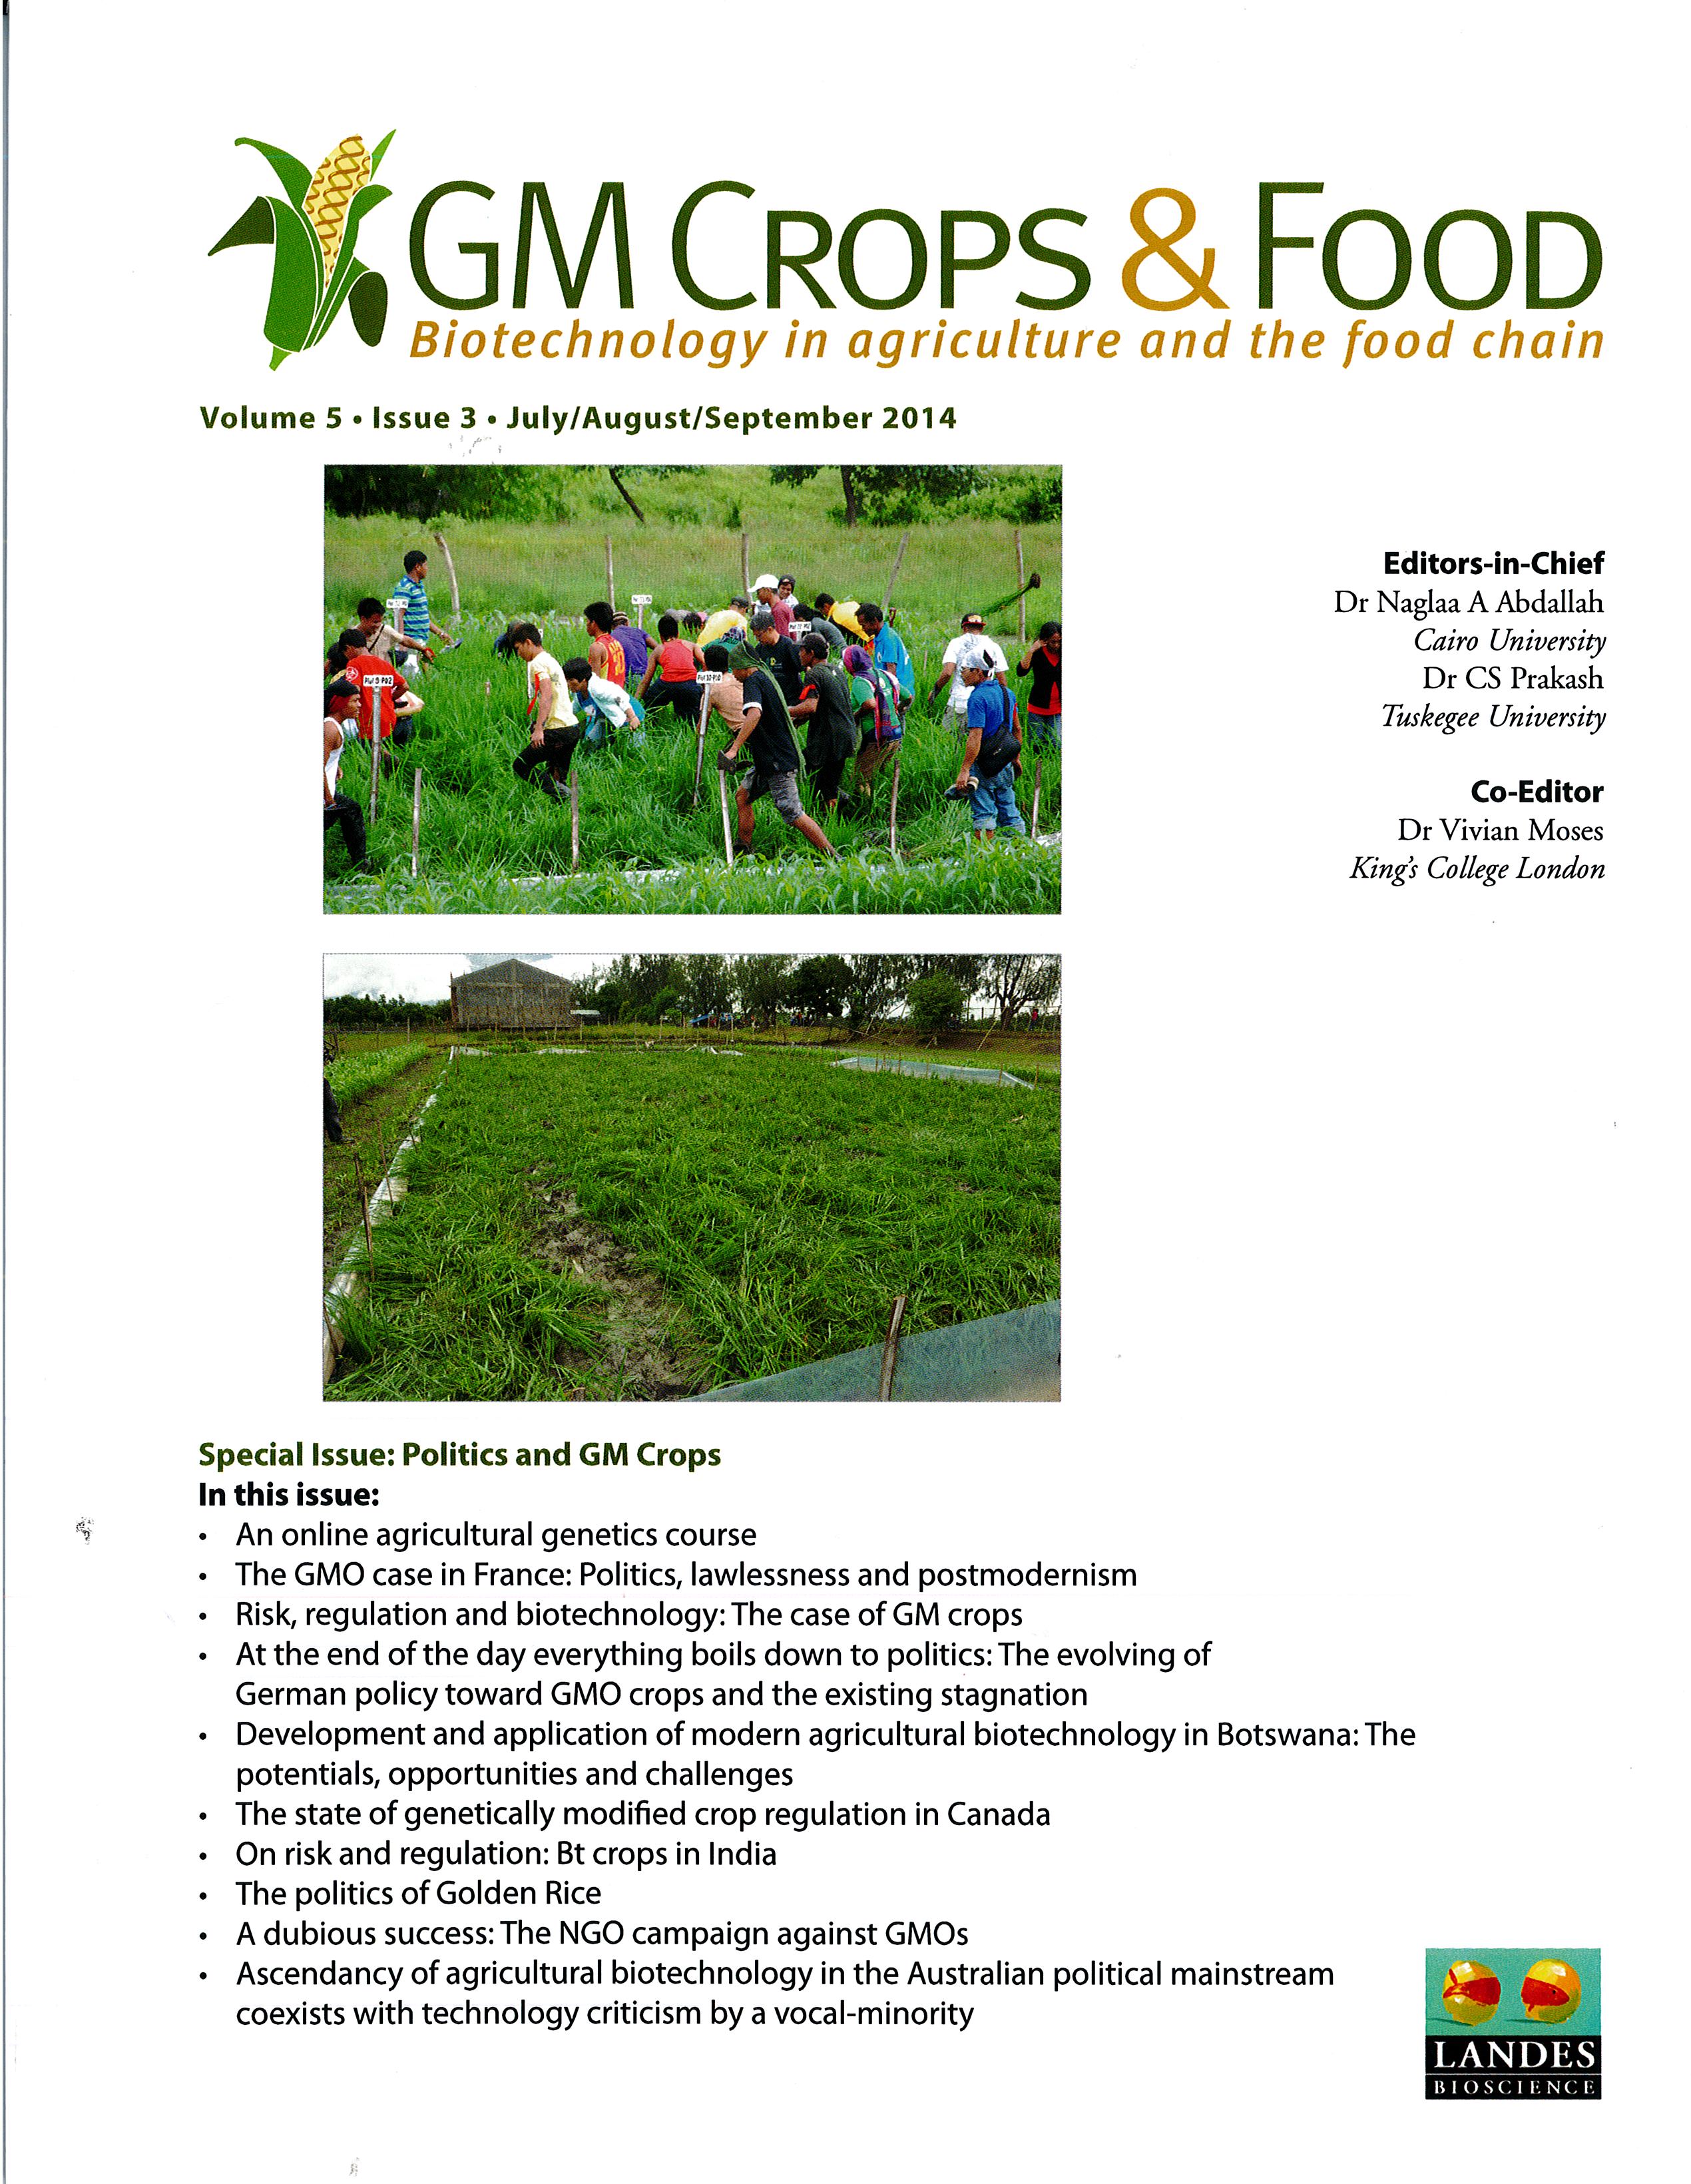 Cover image for GM Crops & Food, Volume 5, Issue 3, 2014